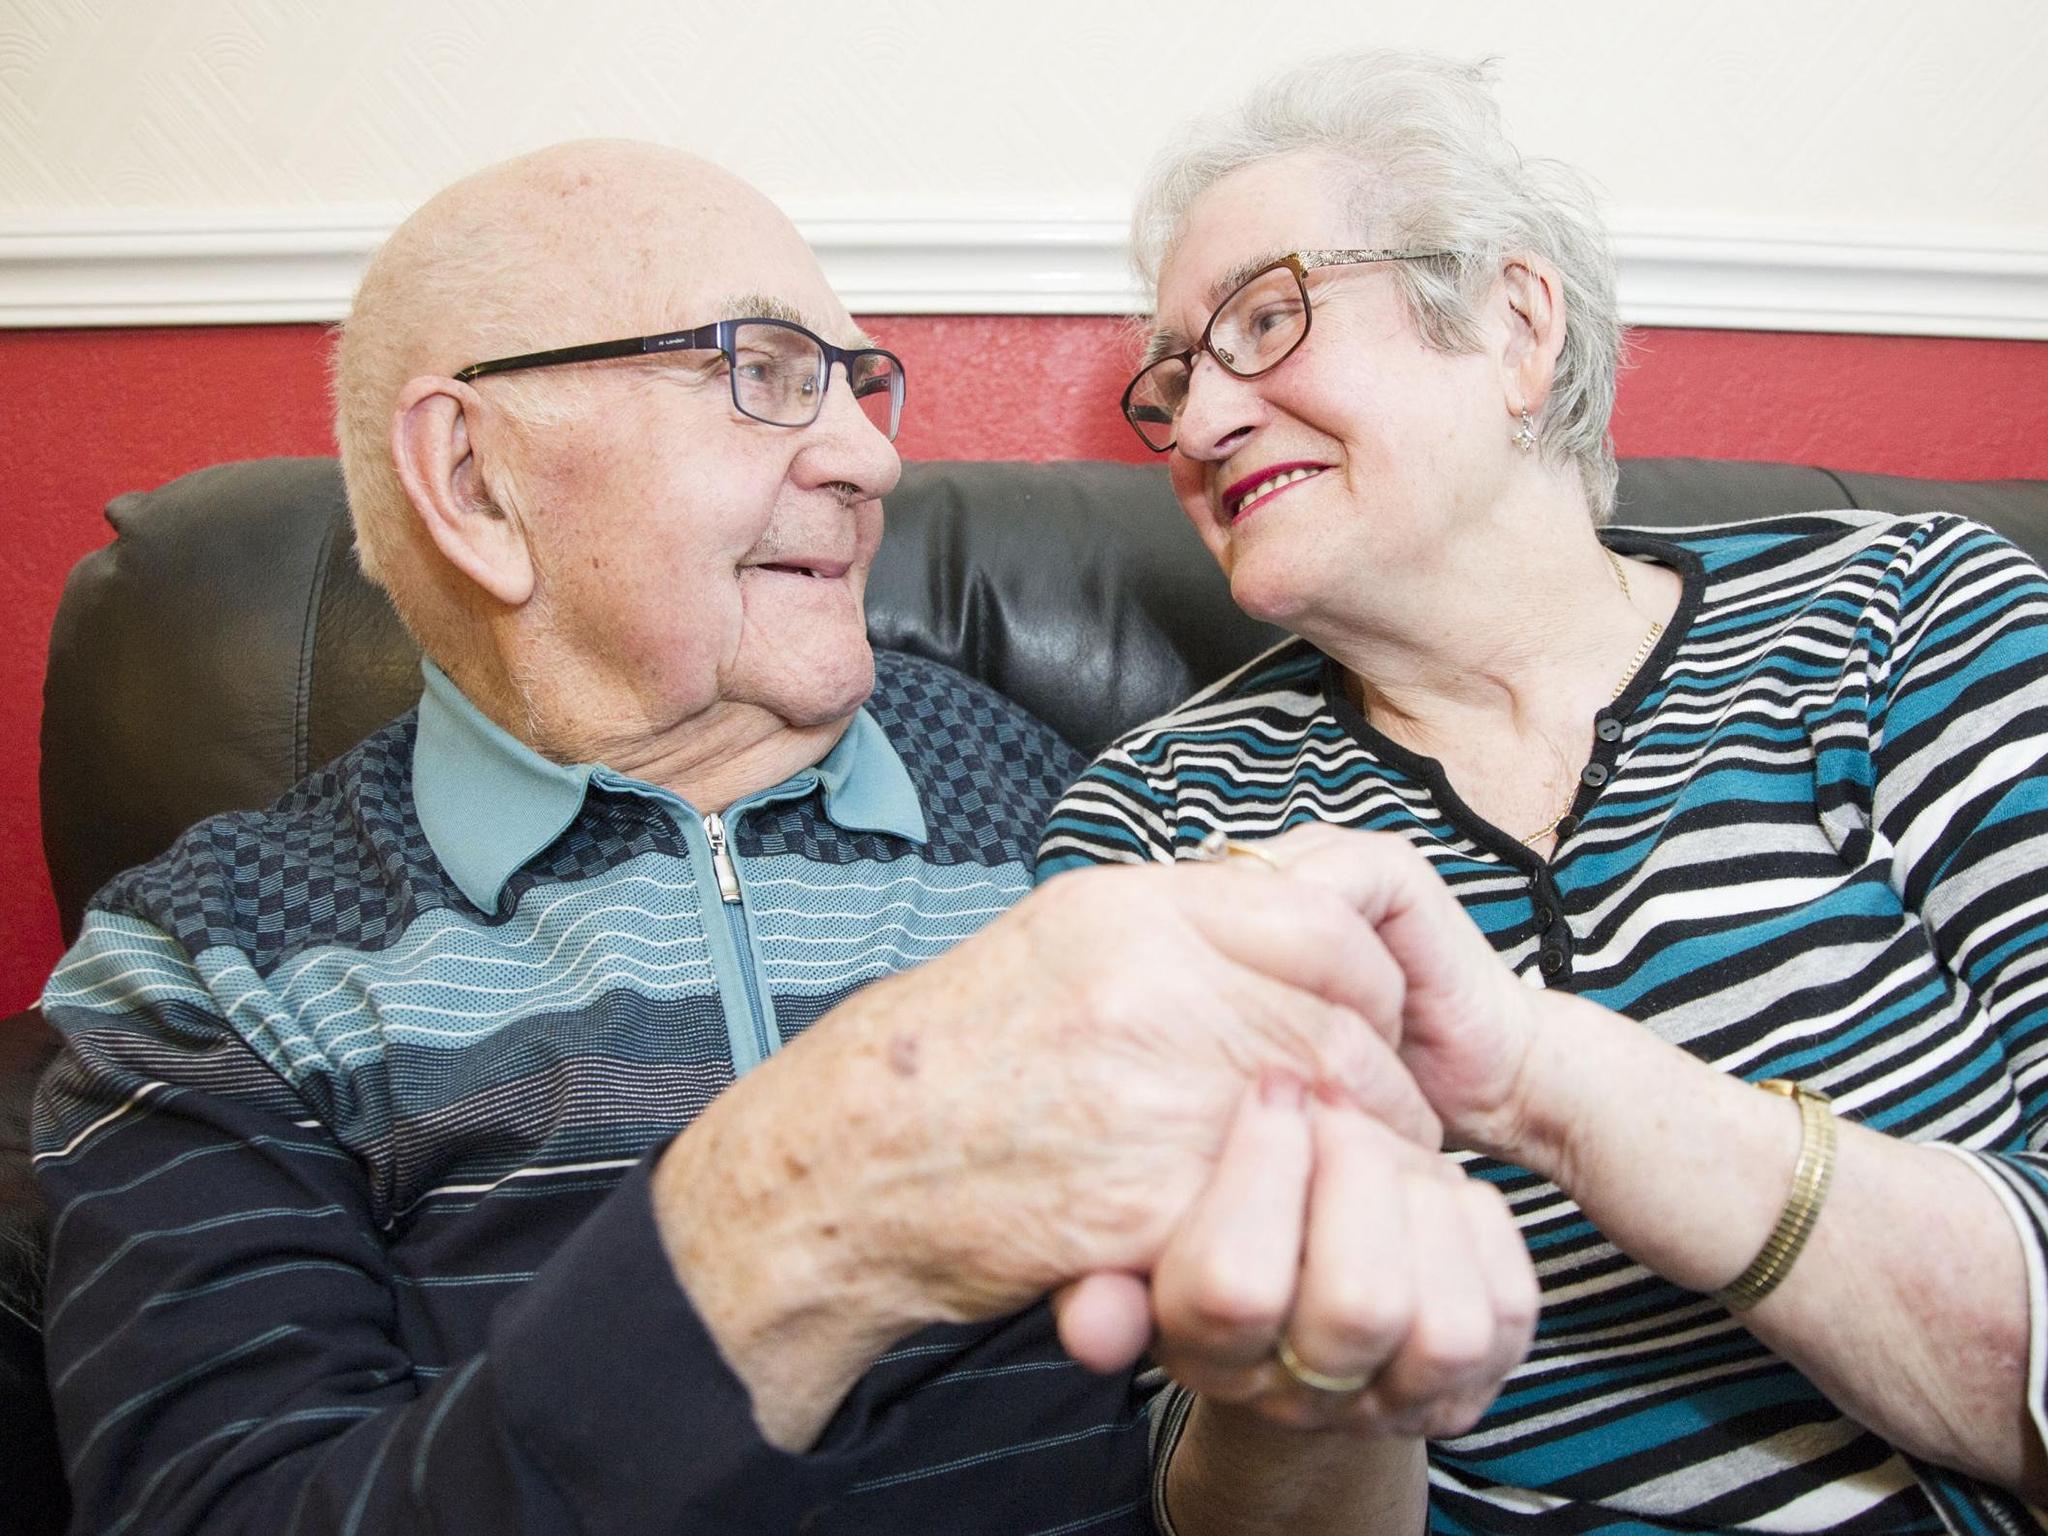 Joan Grant, 81, wed Ted Wright, 90 tied the knot at Swindon Register Office